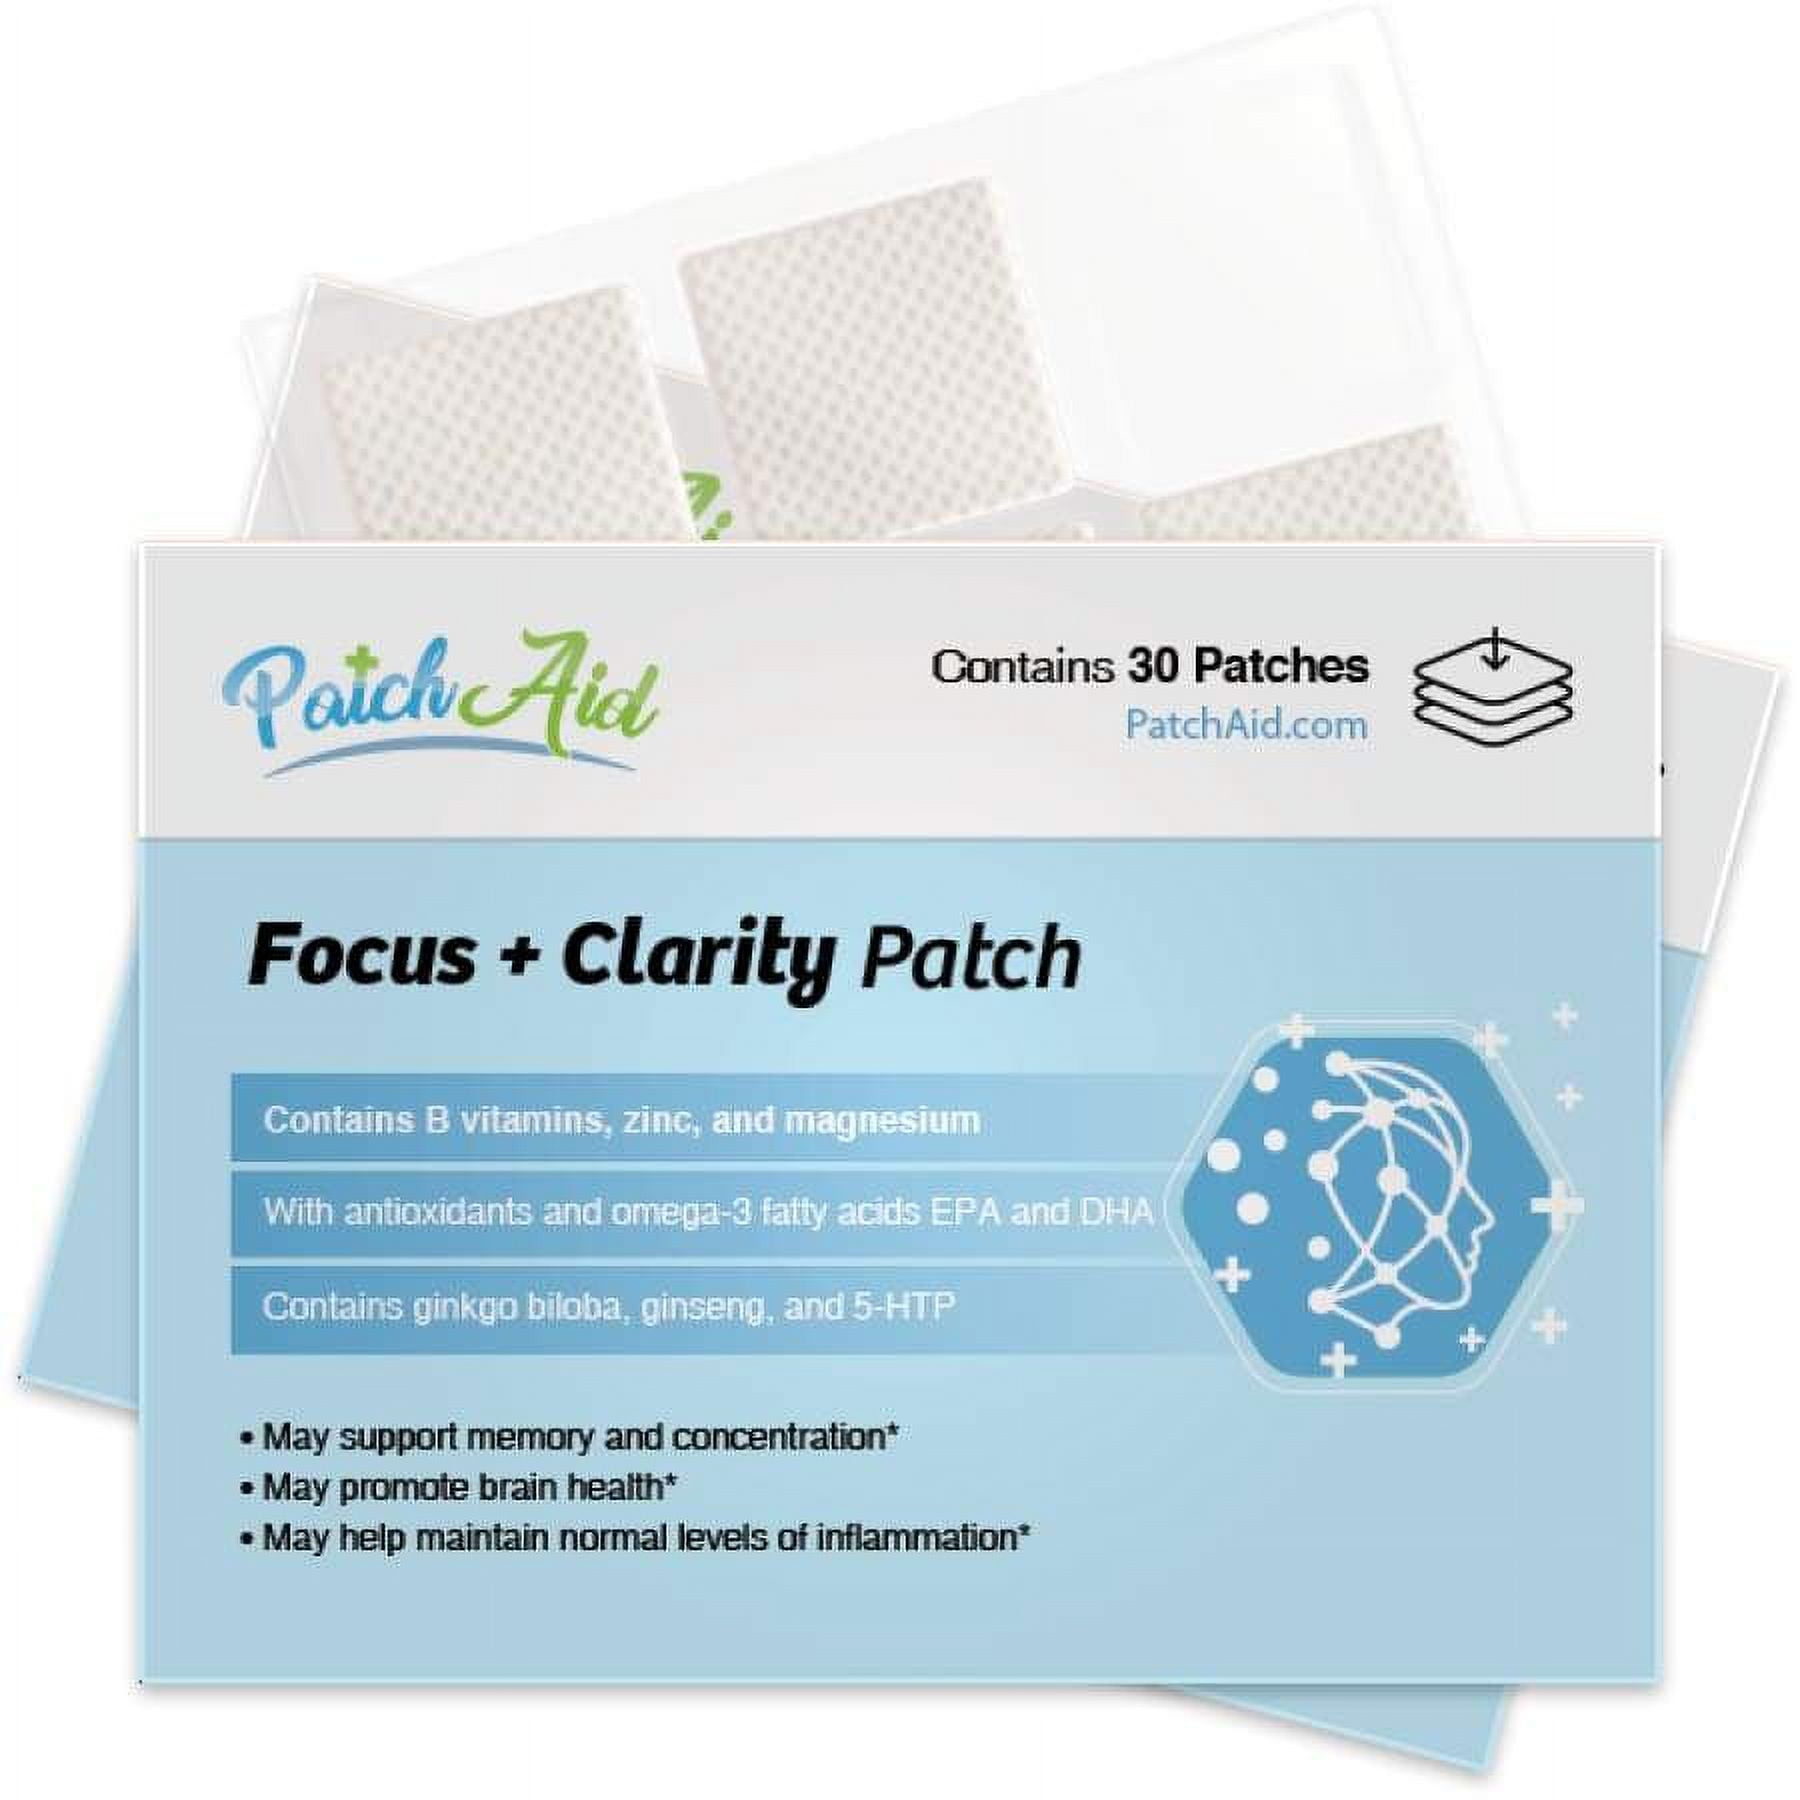 Multi Plus Topical Patch by PatchAid (White) - Pack of 2 30 Count